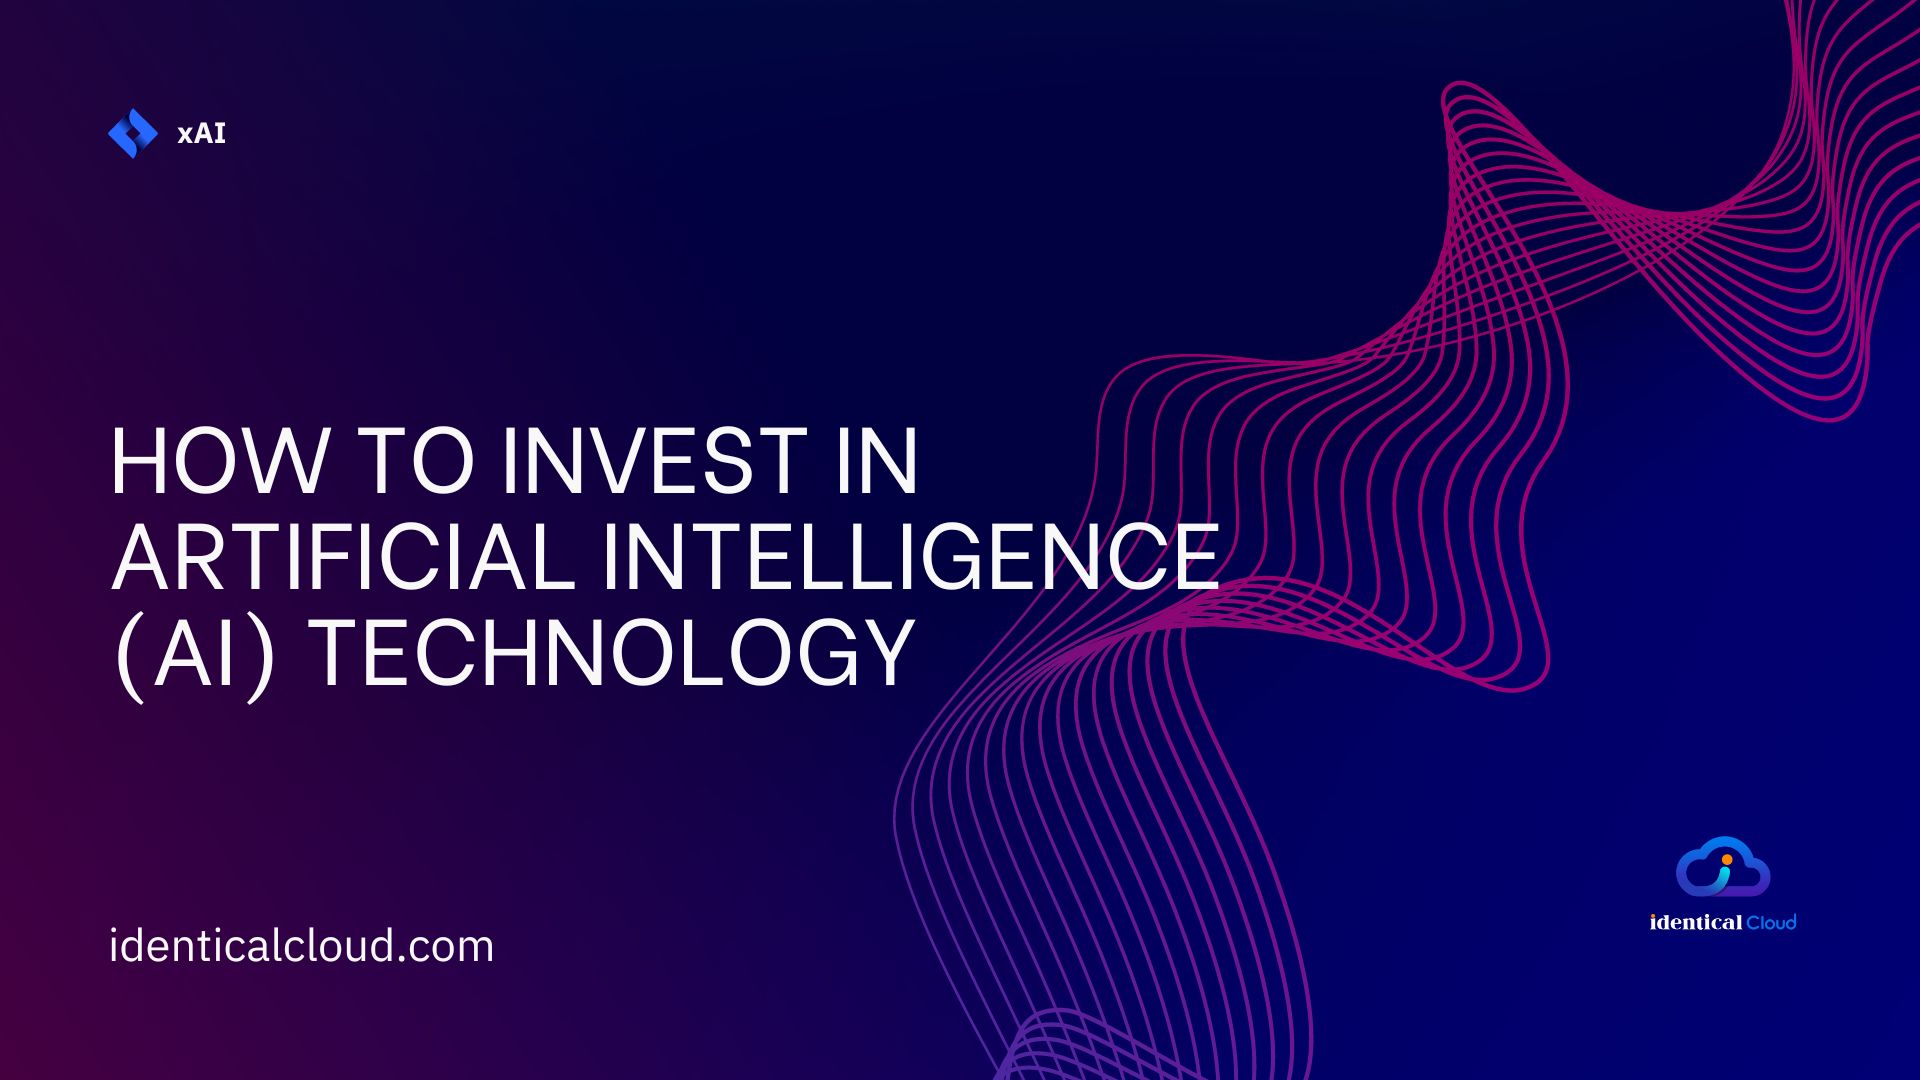 How to Invest in Artificial Intelligence (AI) Technology - identicalcloud.com